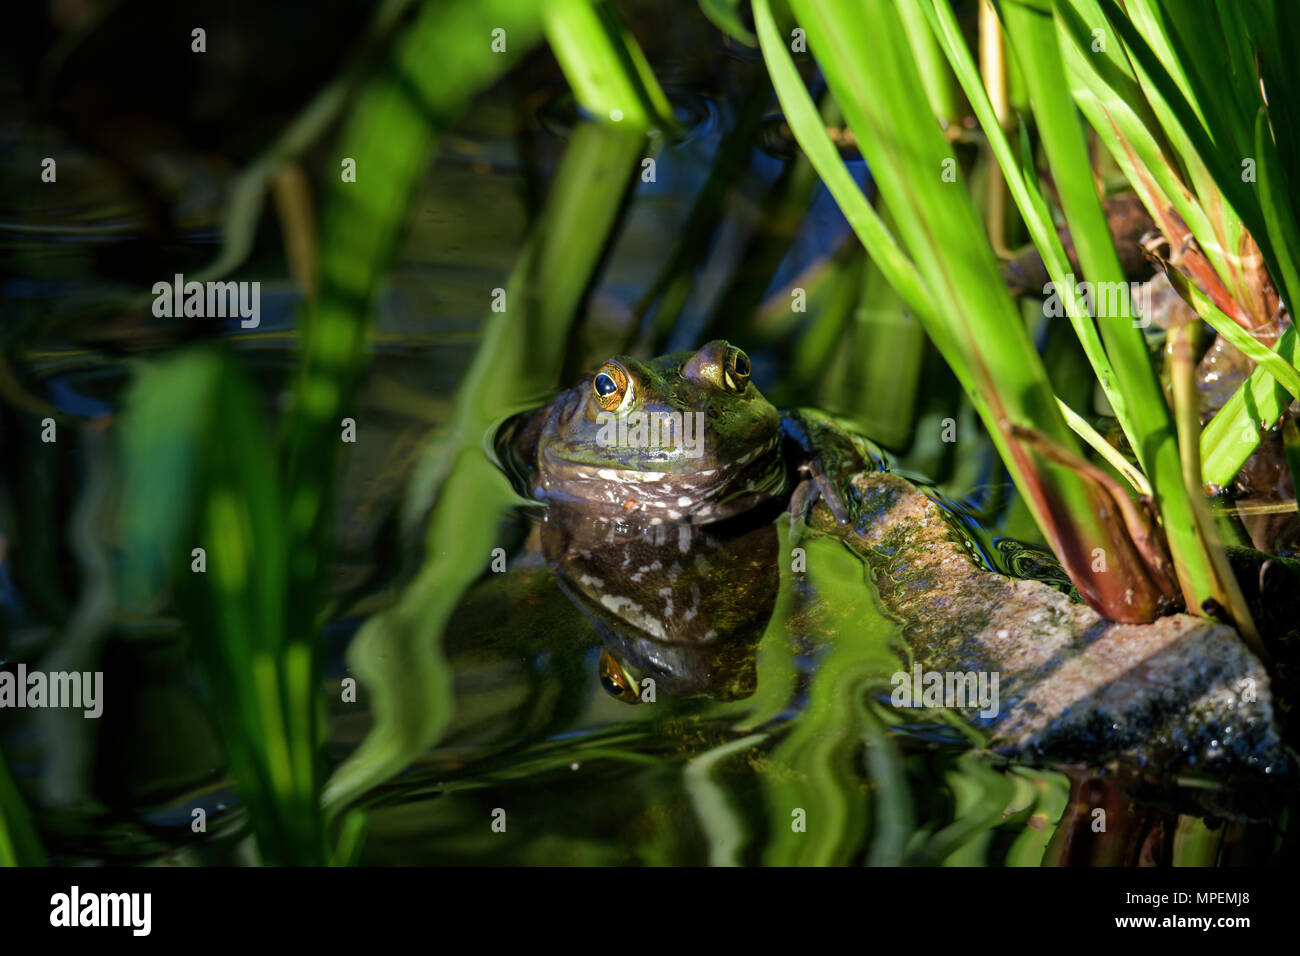 American bullfrog in a reflecting pond. It is an amphibious frog, and a member of the family Ranidae, or true frogs. Stock Photo